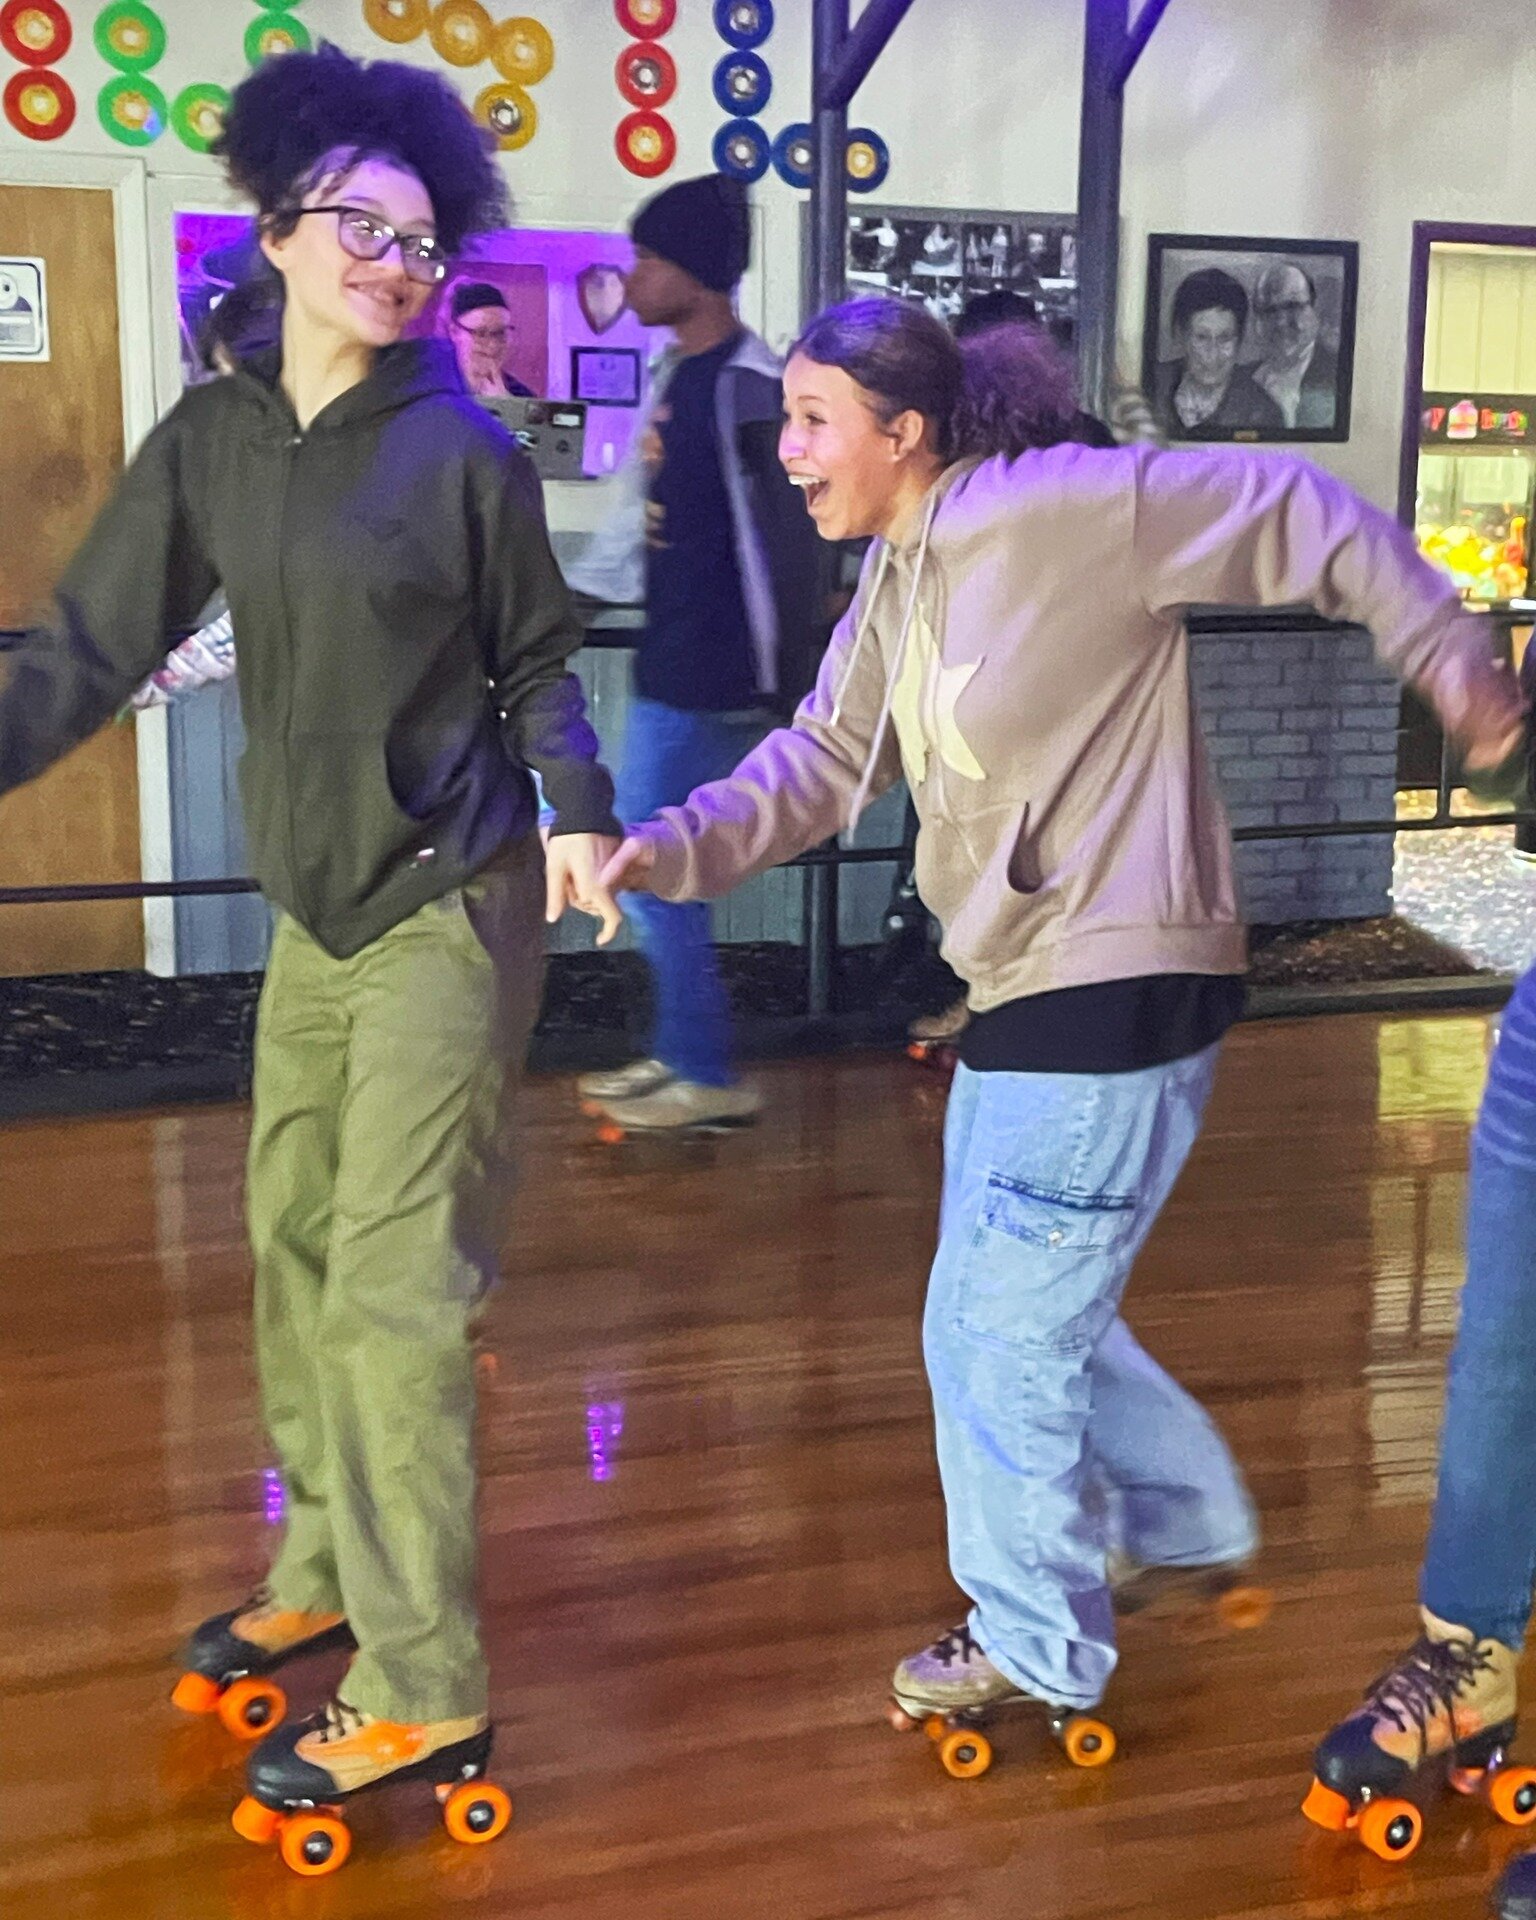 Roller skating, relationships, resiliency. 
🛼😄
On Saturday, we ended our roller skating adventure on a high note with one final outing at Jimmie's Rollerdrome. Jermaine, an eight-grader at Aiken, said he'll remember that he taught himself to skate 